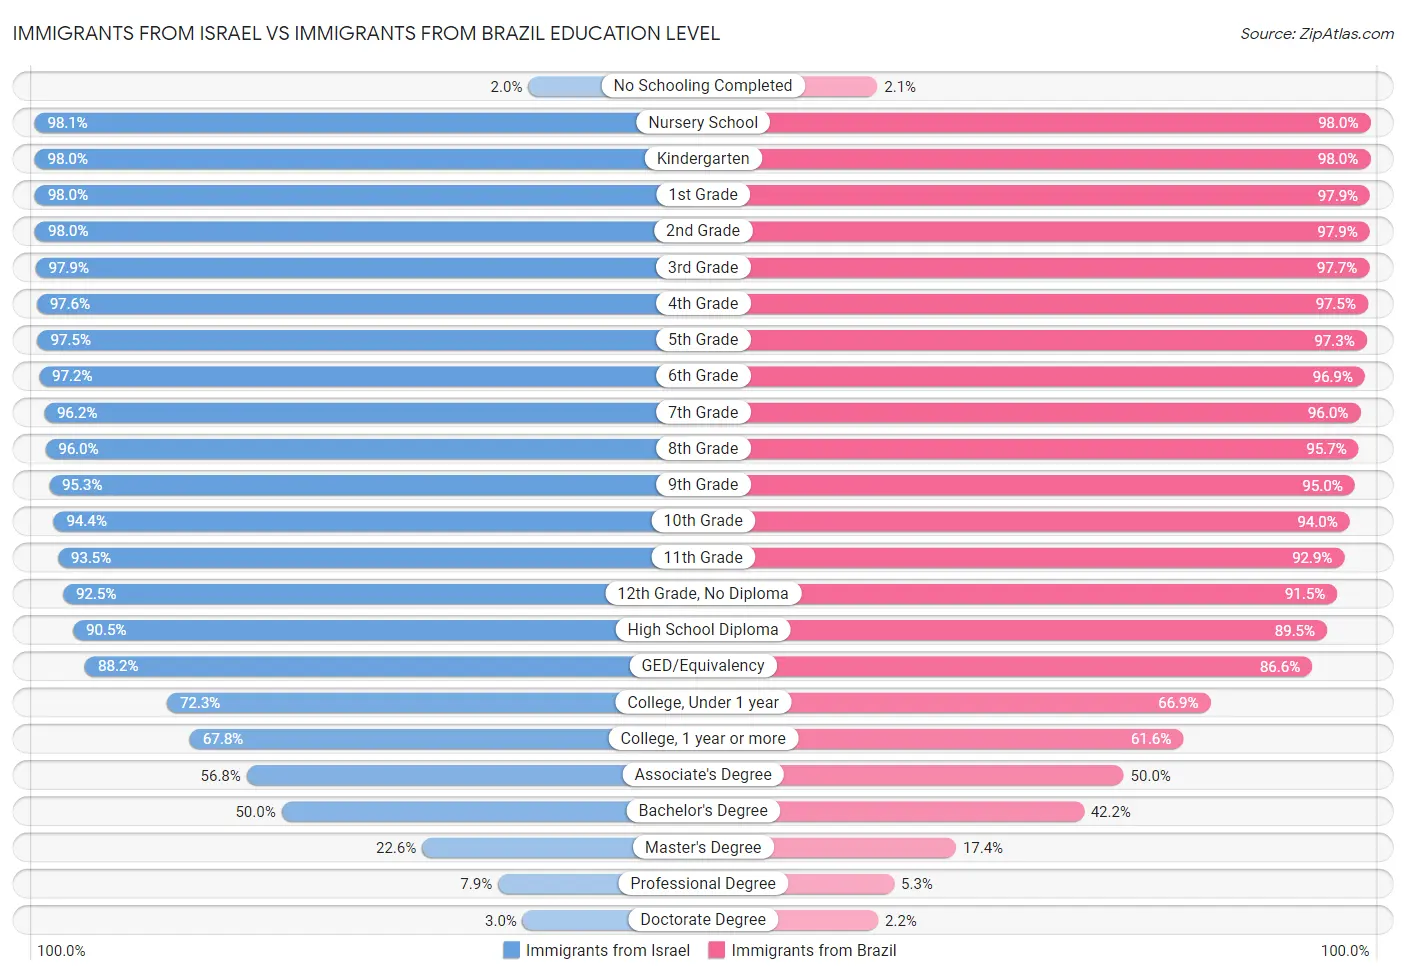 Immigrants from Israel vs Immigrants from Brazil Education Level